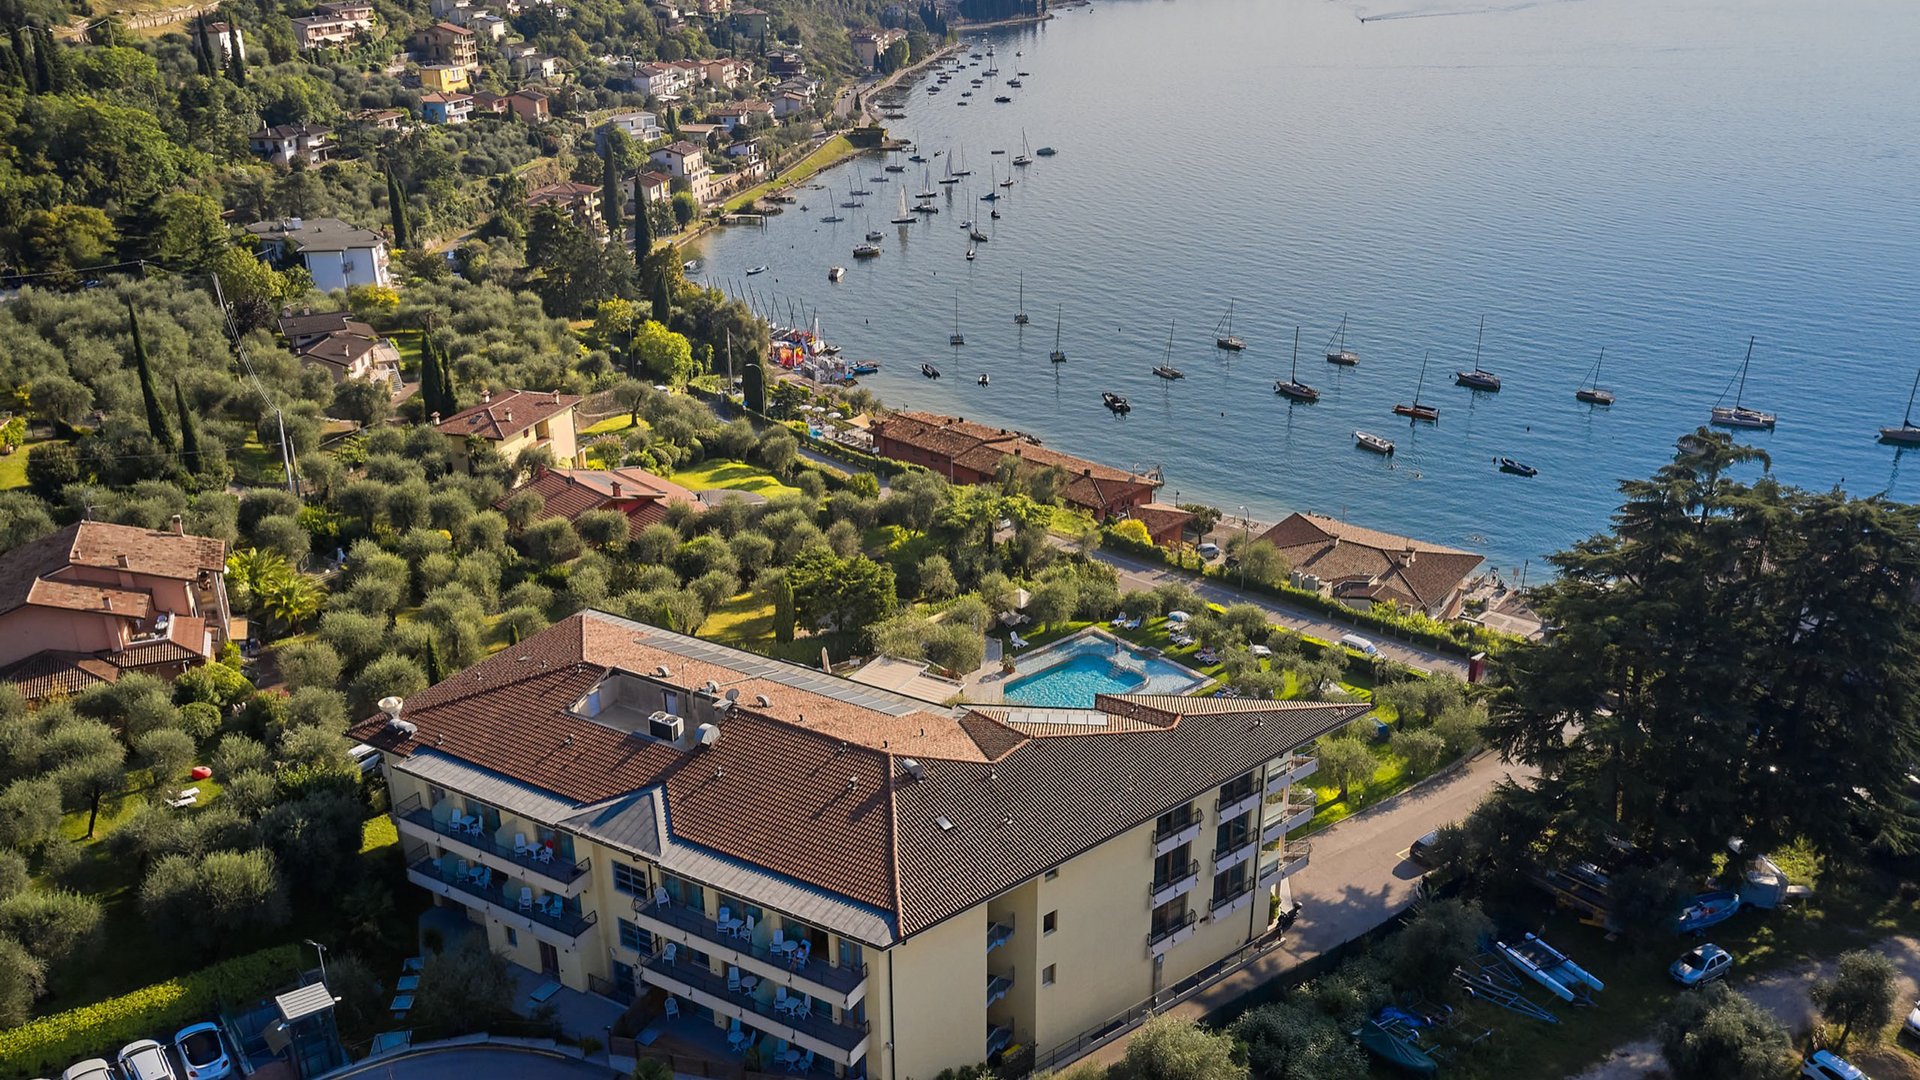 Looking for a suite at Lake Garda?